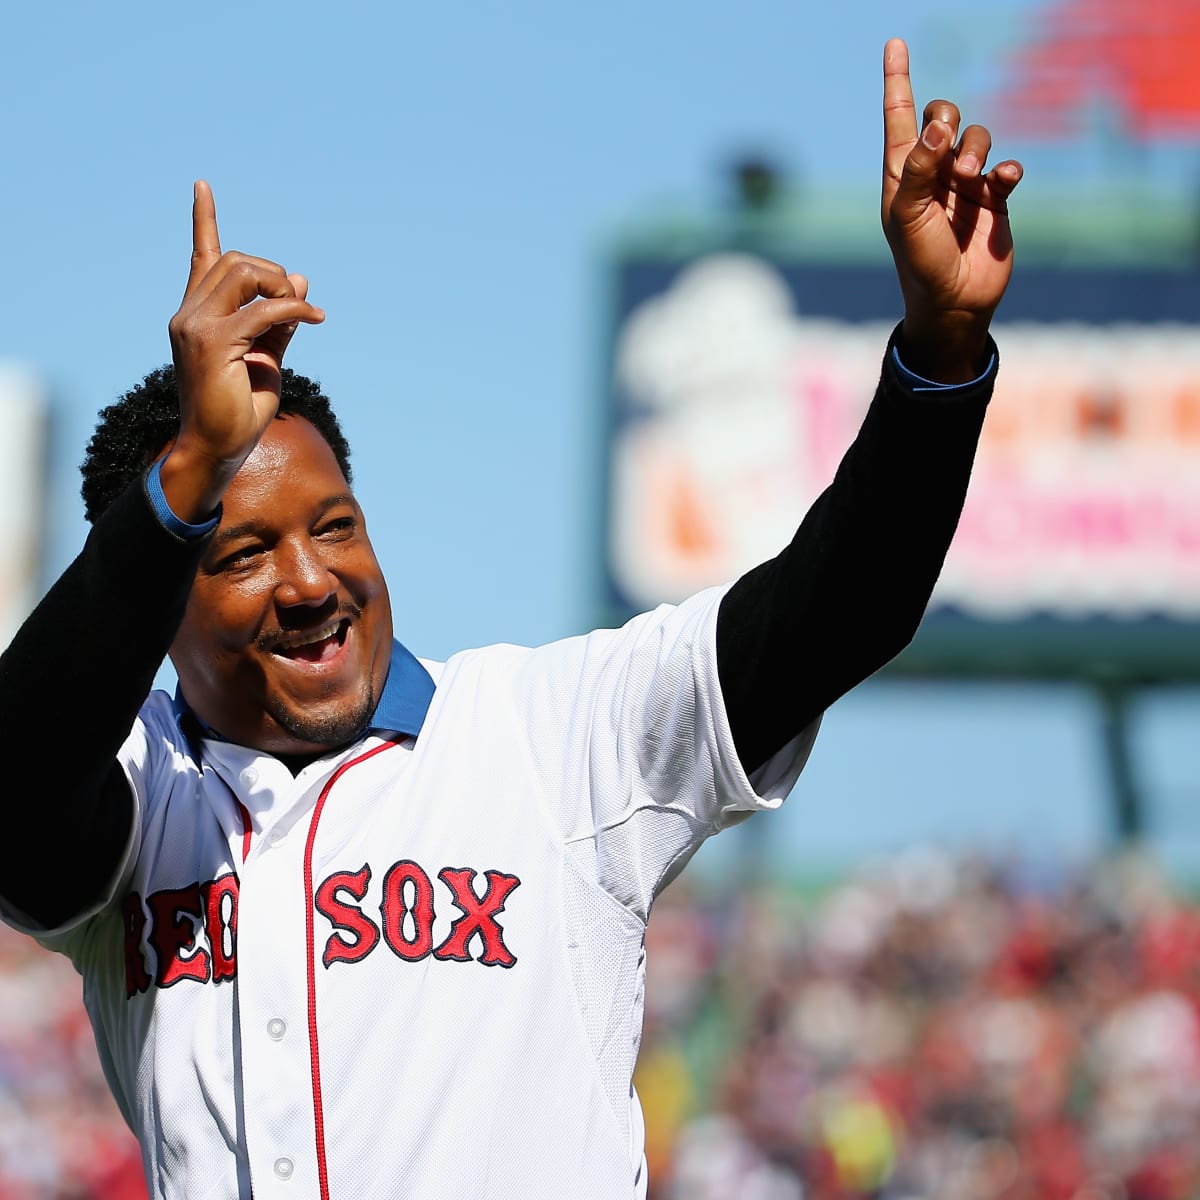 Red Sox to retire Pedro Martinez's No. 45 jersey on July 28